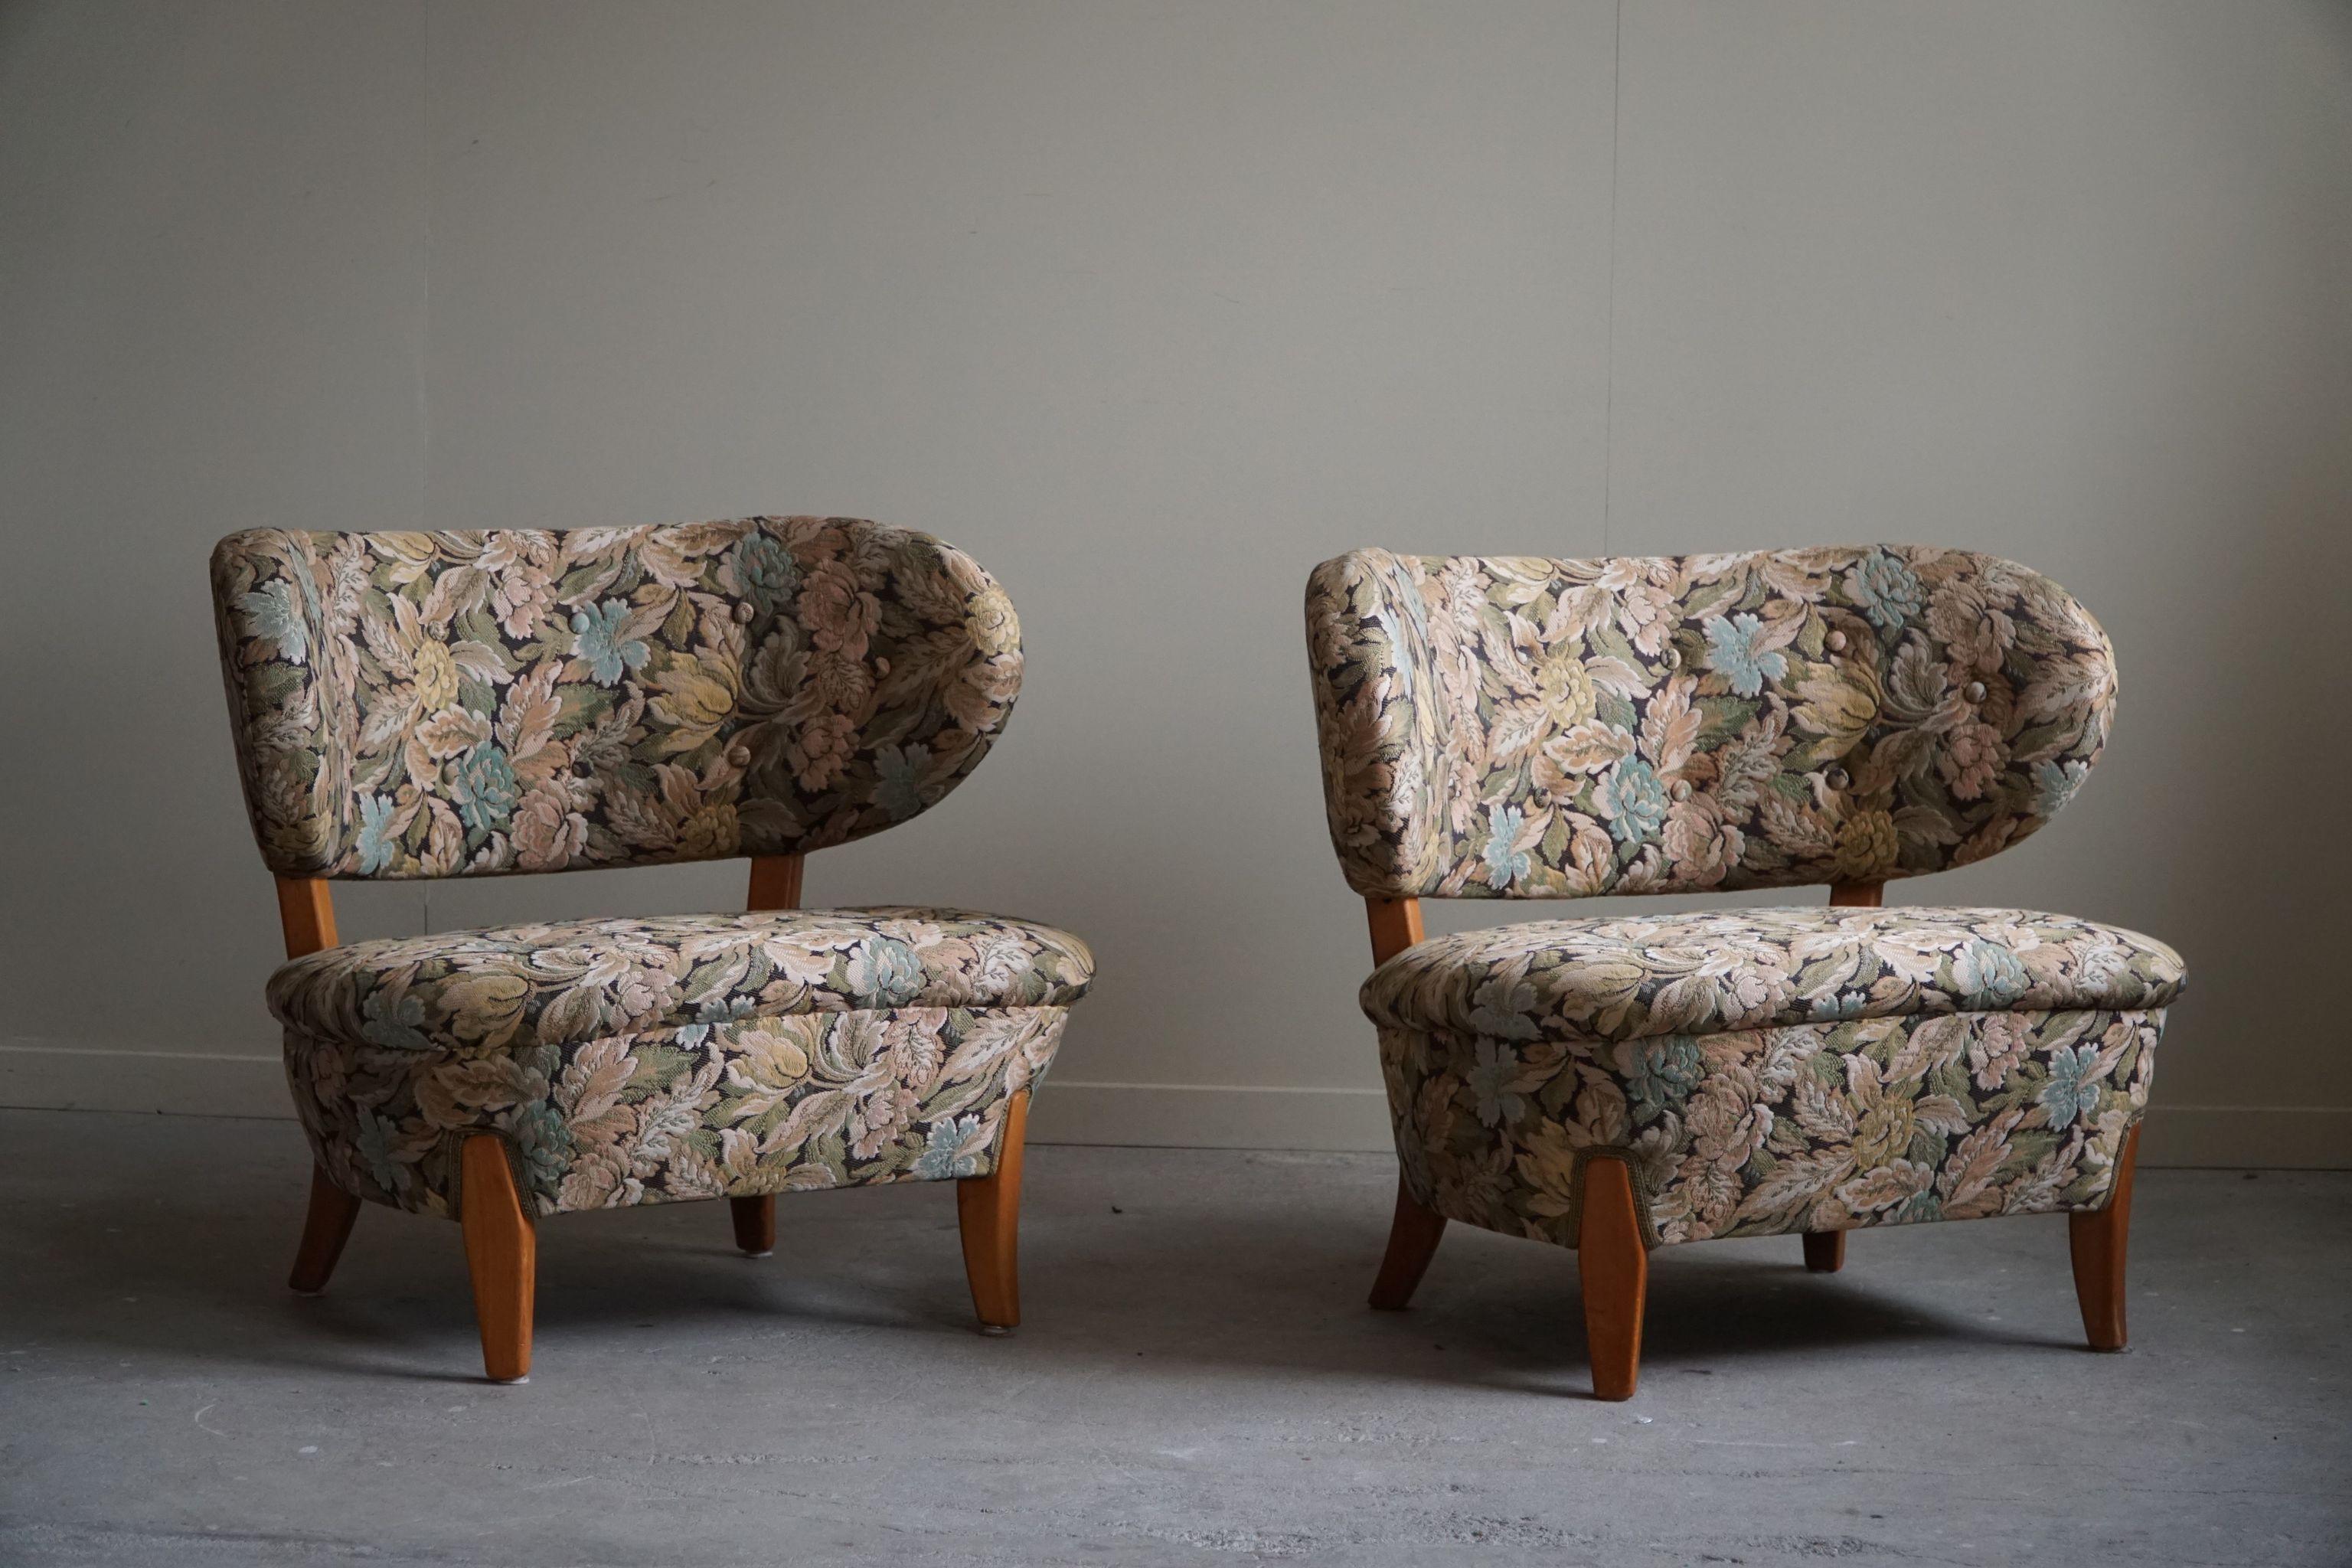 Otto Schulz, A Pair of Lounge Chairs, Jio Möbler, Swedish Modern, 1950s For Sale 8